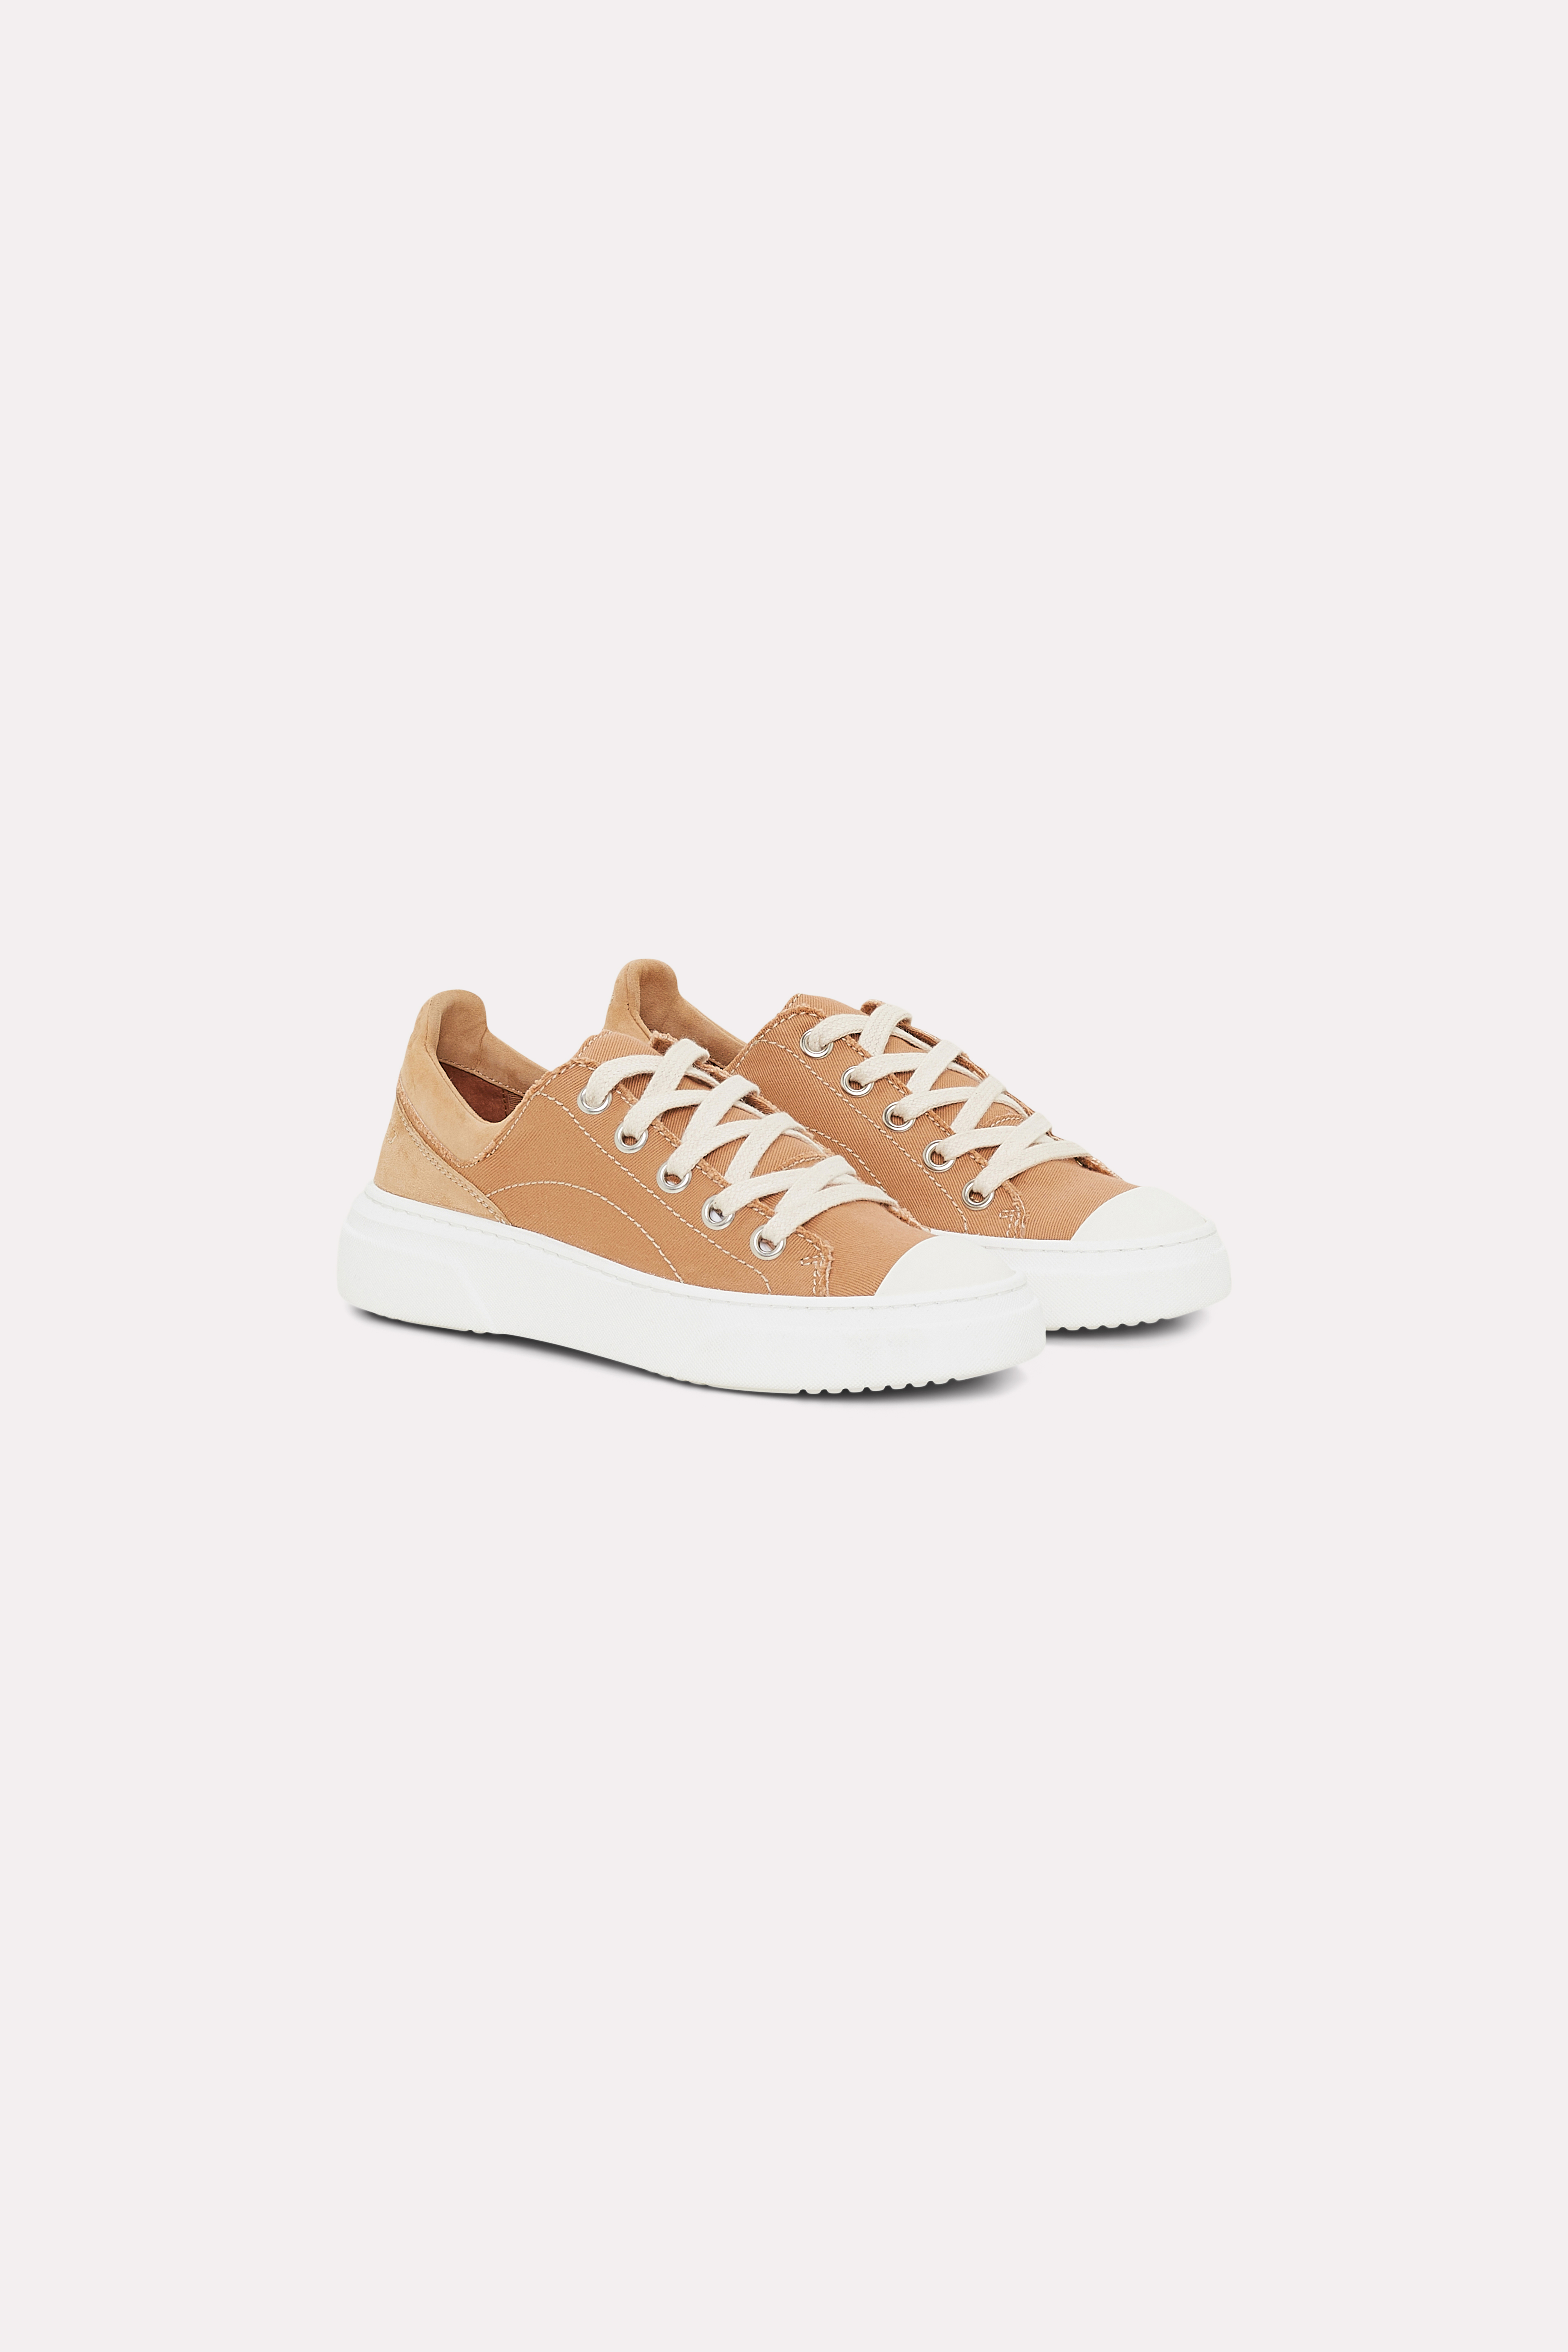 DOROTHEE SCHUMACHER CANVAS SNEAKERS WITH RUBBER TOE